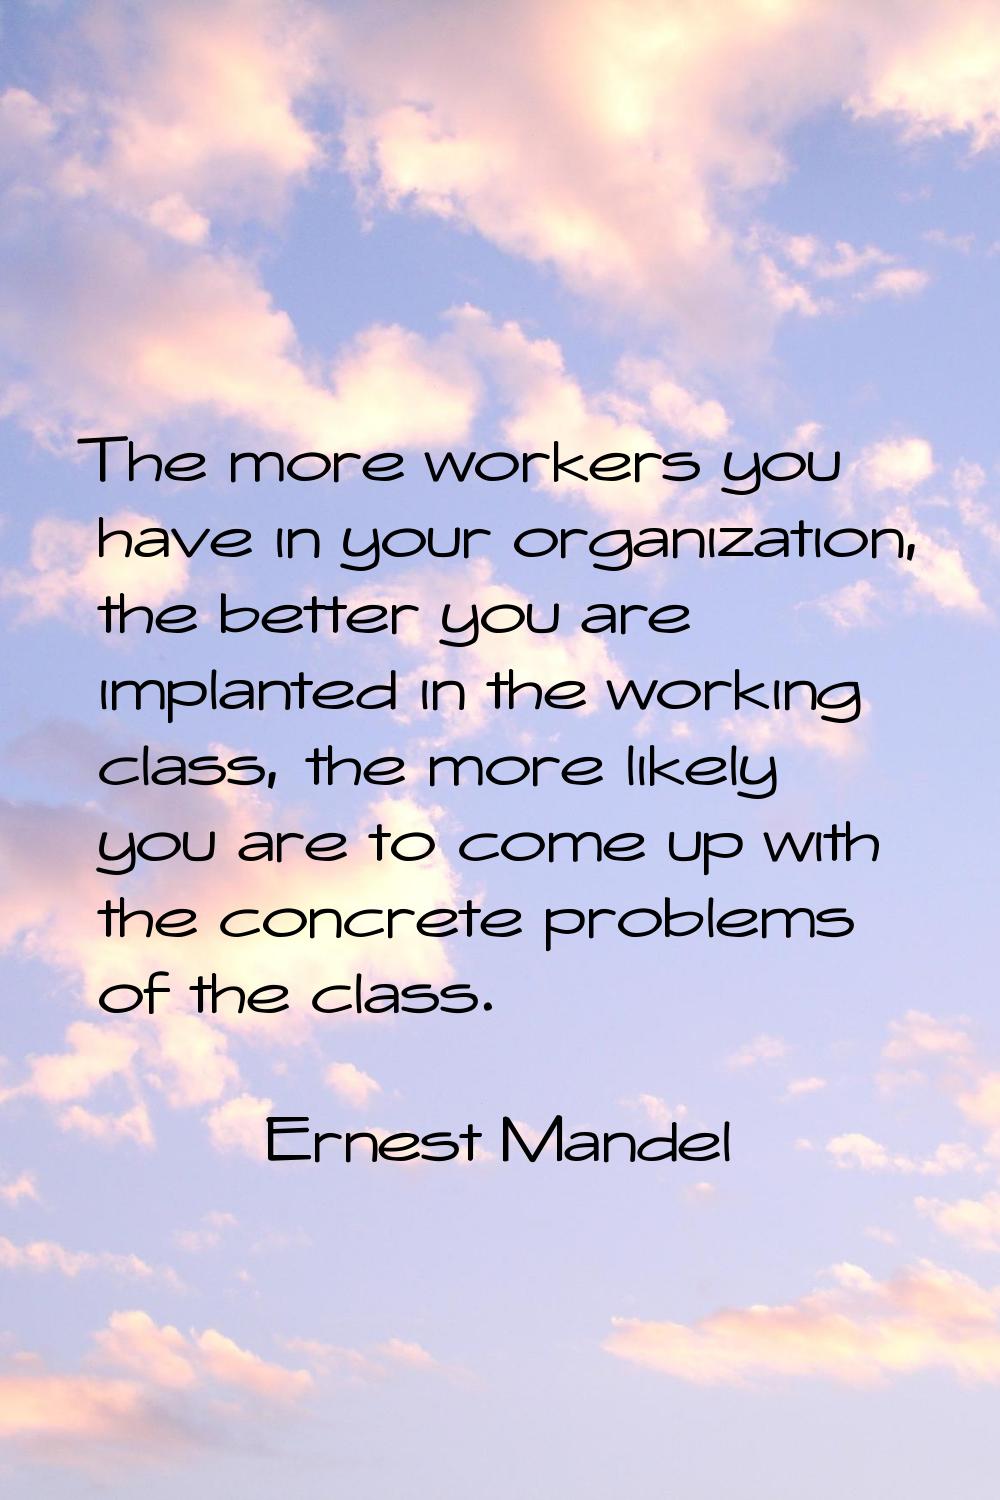 The more workers you have in your organization, the better you are implanted in the working class, 